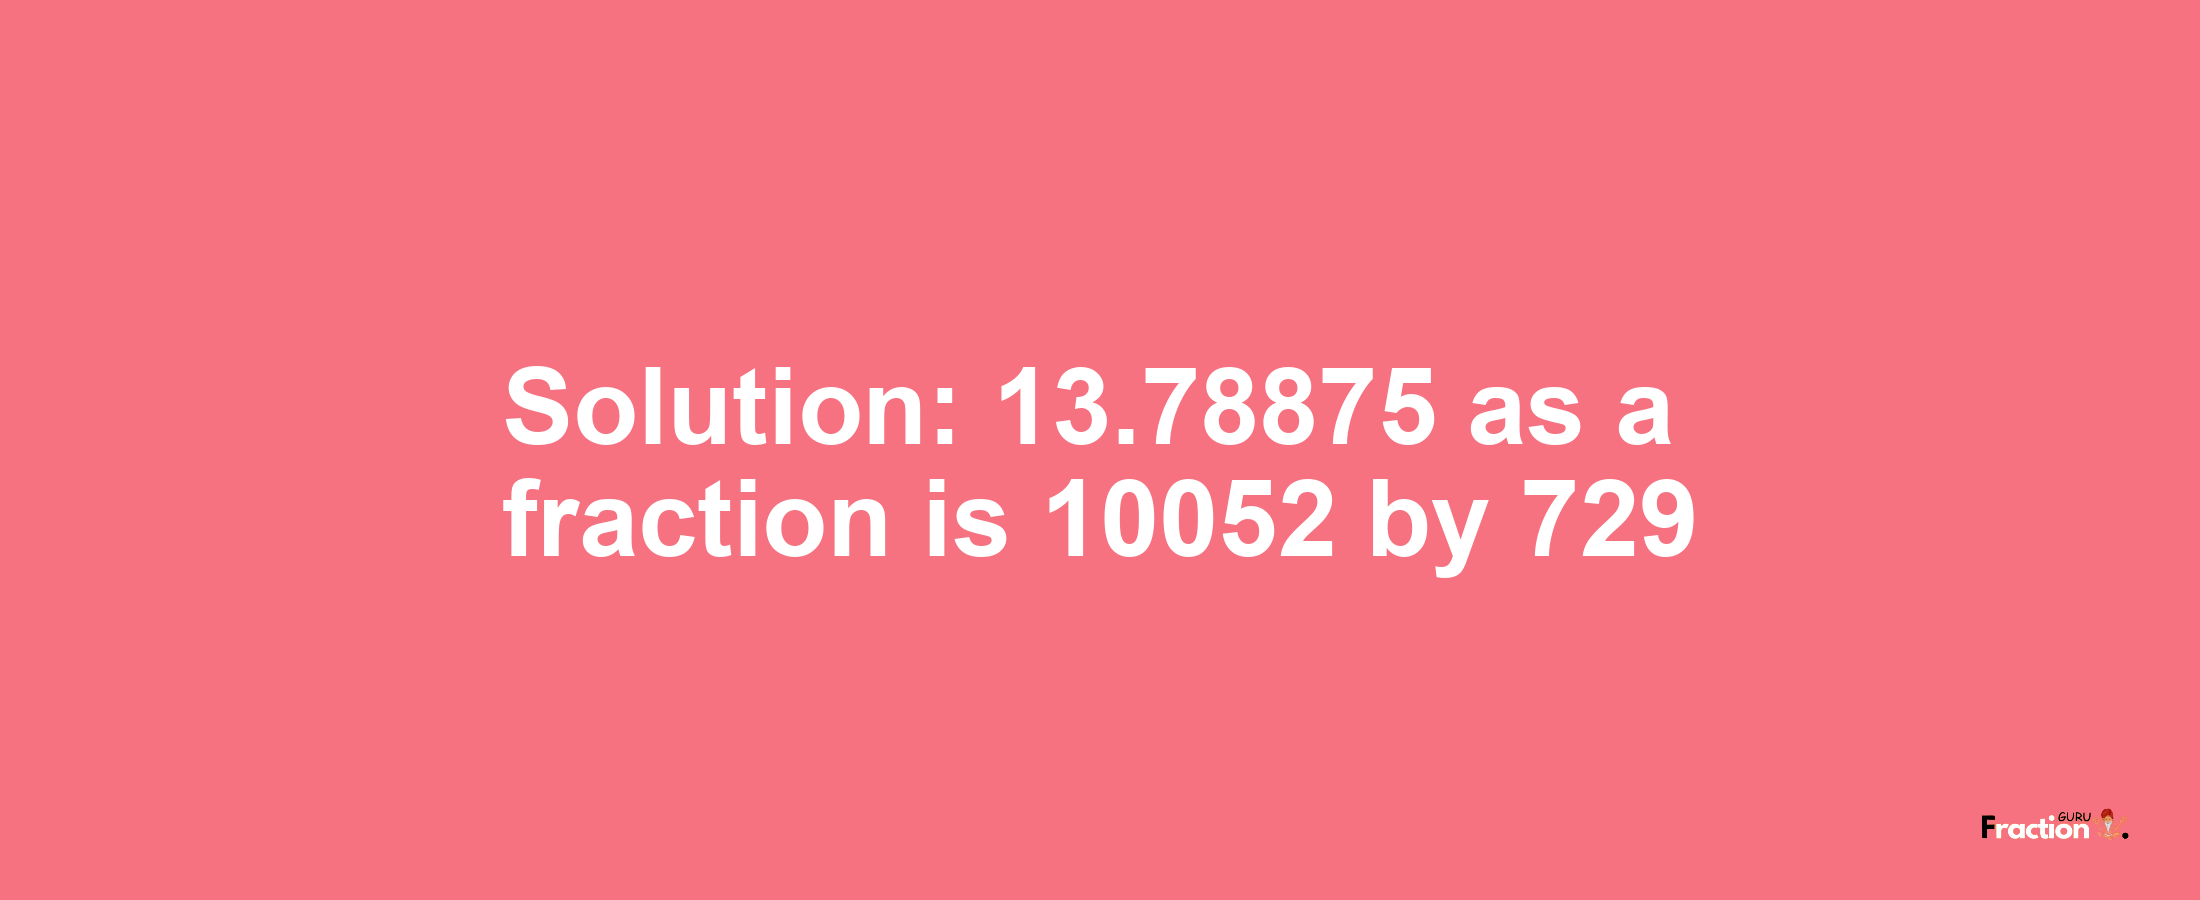 Solution:13.78875 as a fraction is 10052/729